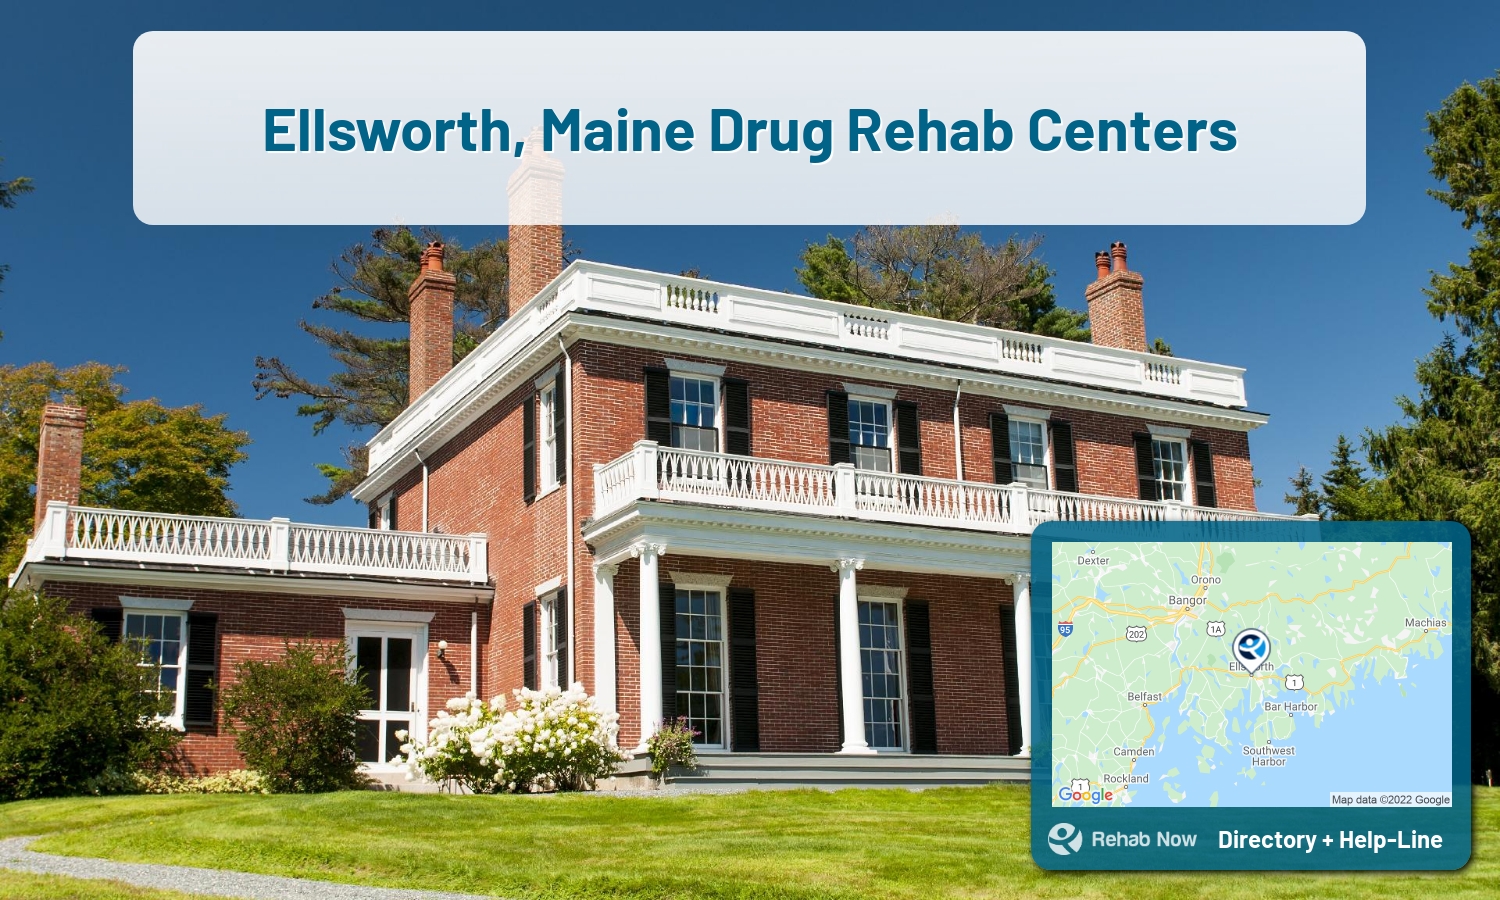 View options, availability, treatment methods, and more, for drug rehab and alcohol treatment in Ellsworth, Maine